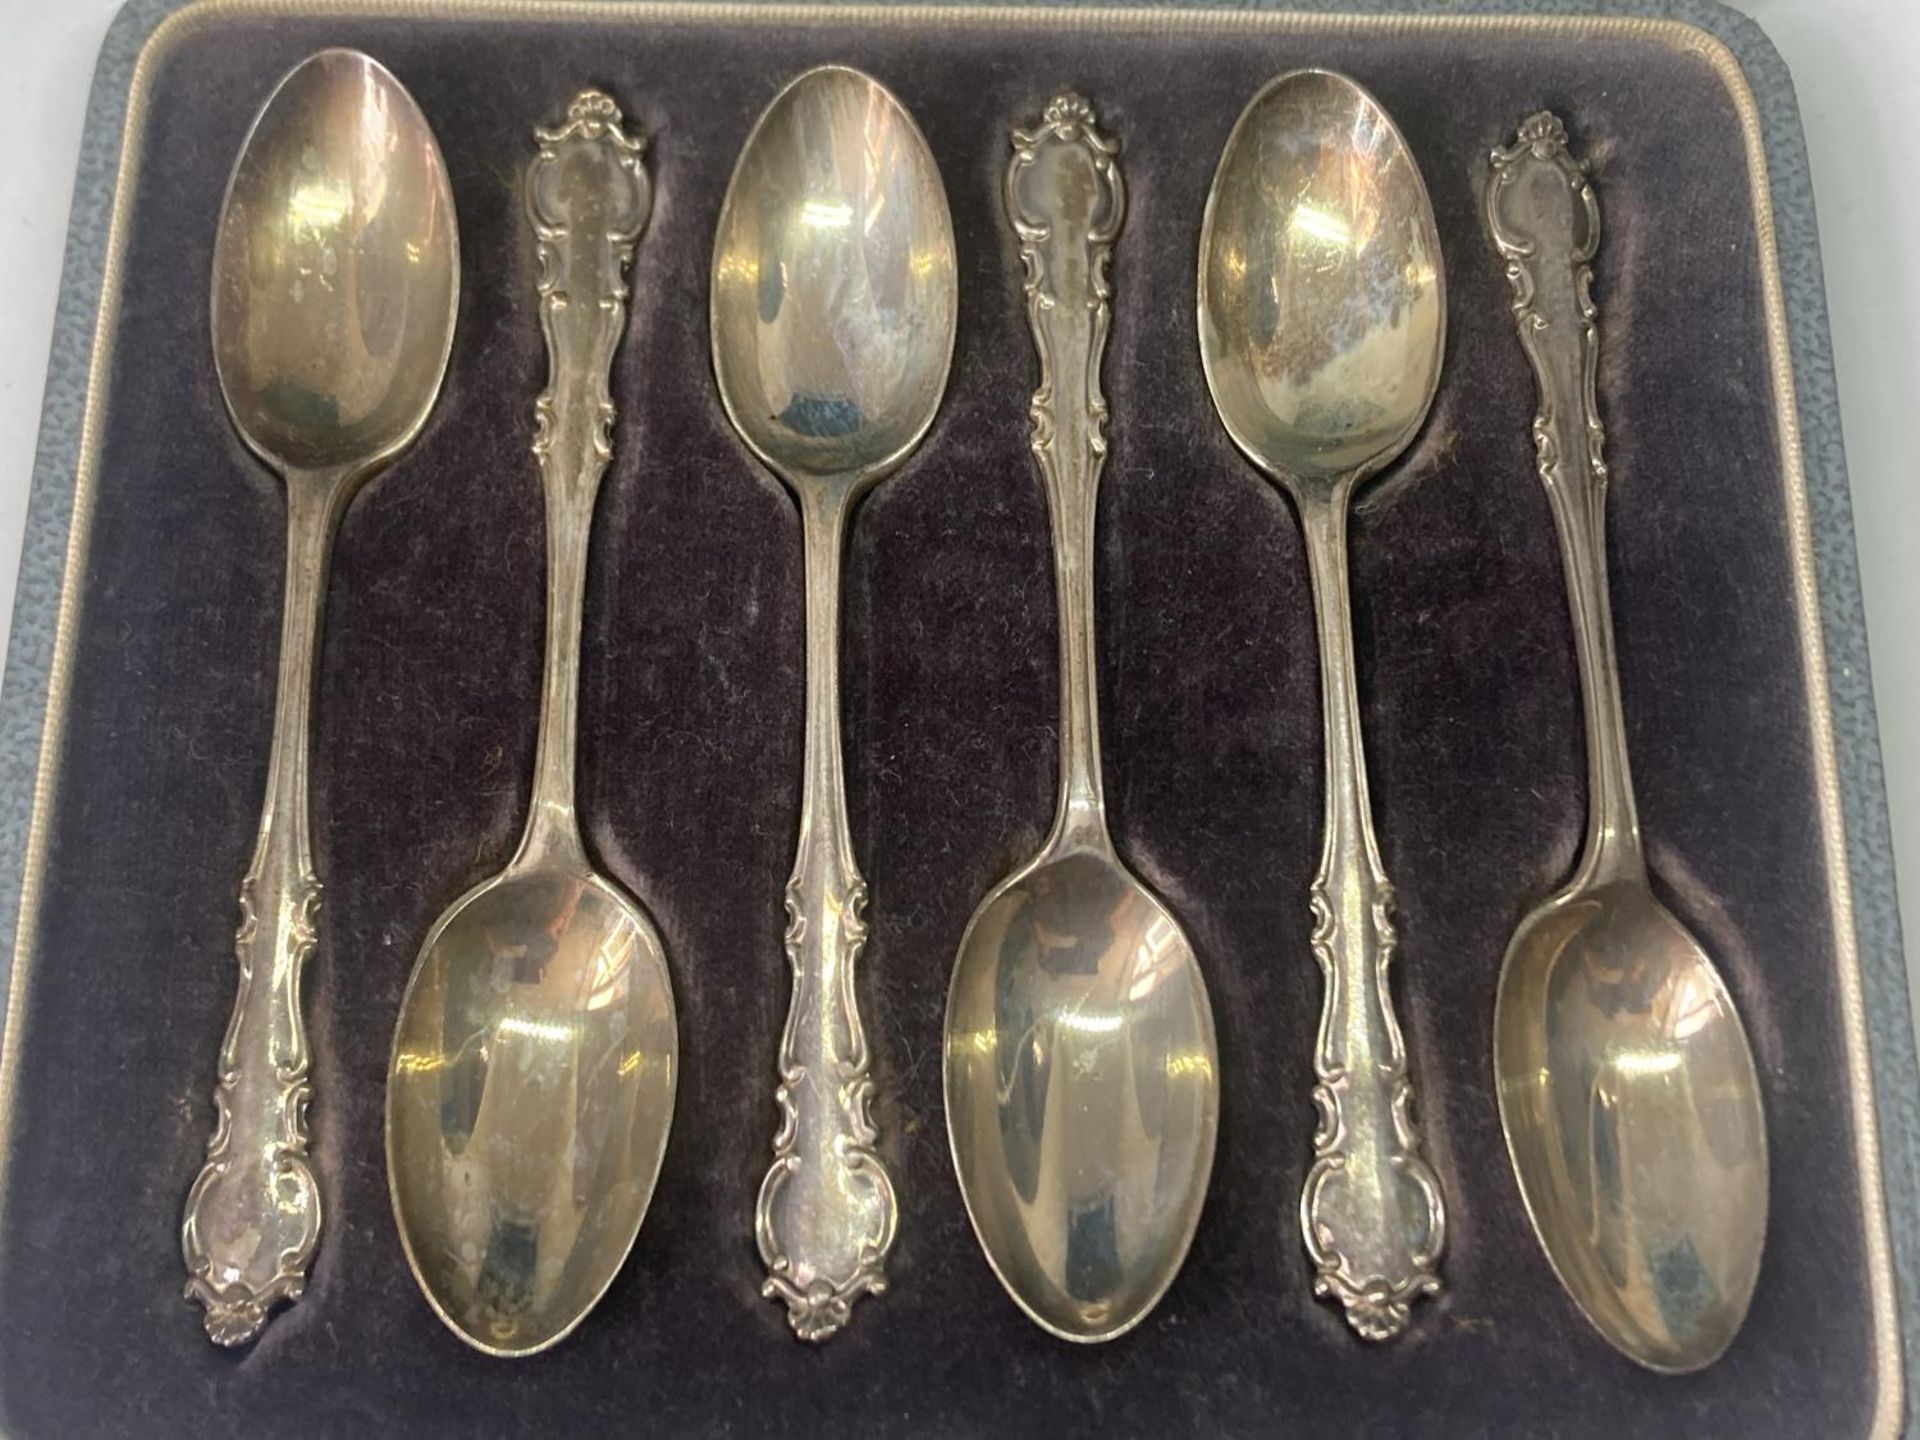 A SET OF SIX HALLMARKED LONDON TEASPOONS IN A PRESENTATION BOX - Image 4 of 8